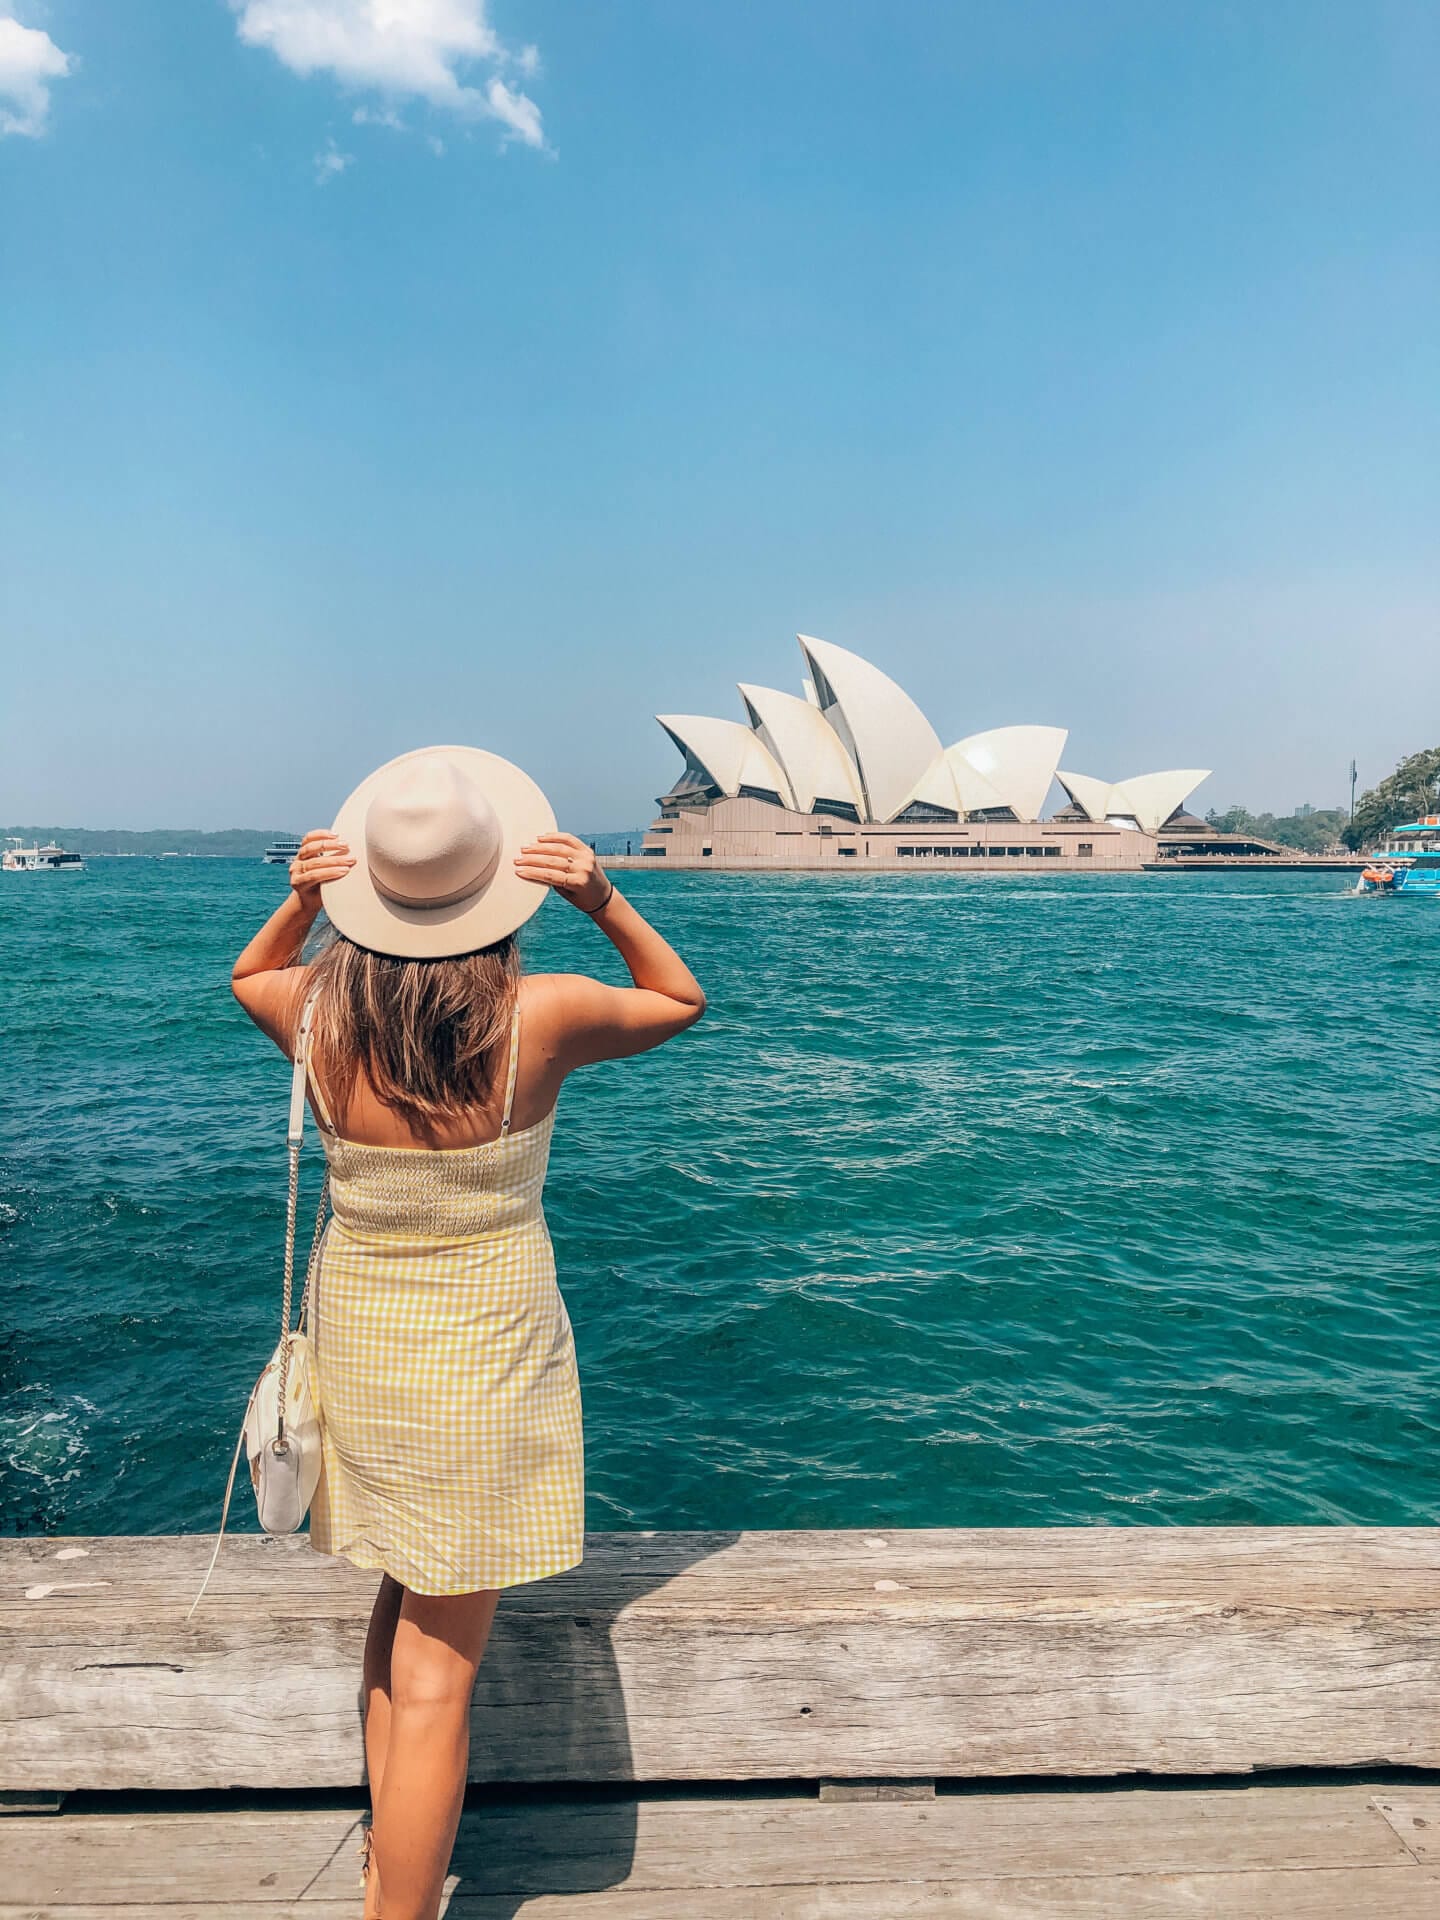 A girl wearing a hat and a yellow dress, looks out at the Sydney Opera House in Australia